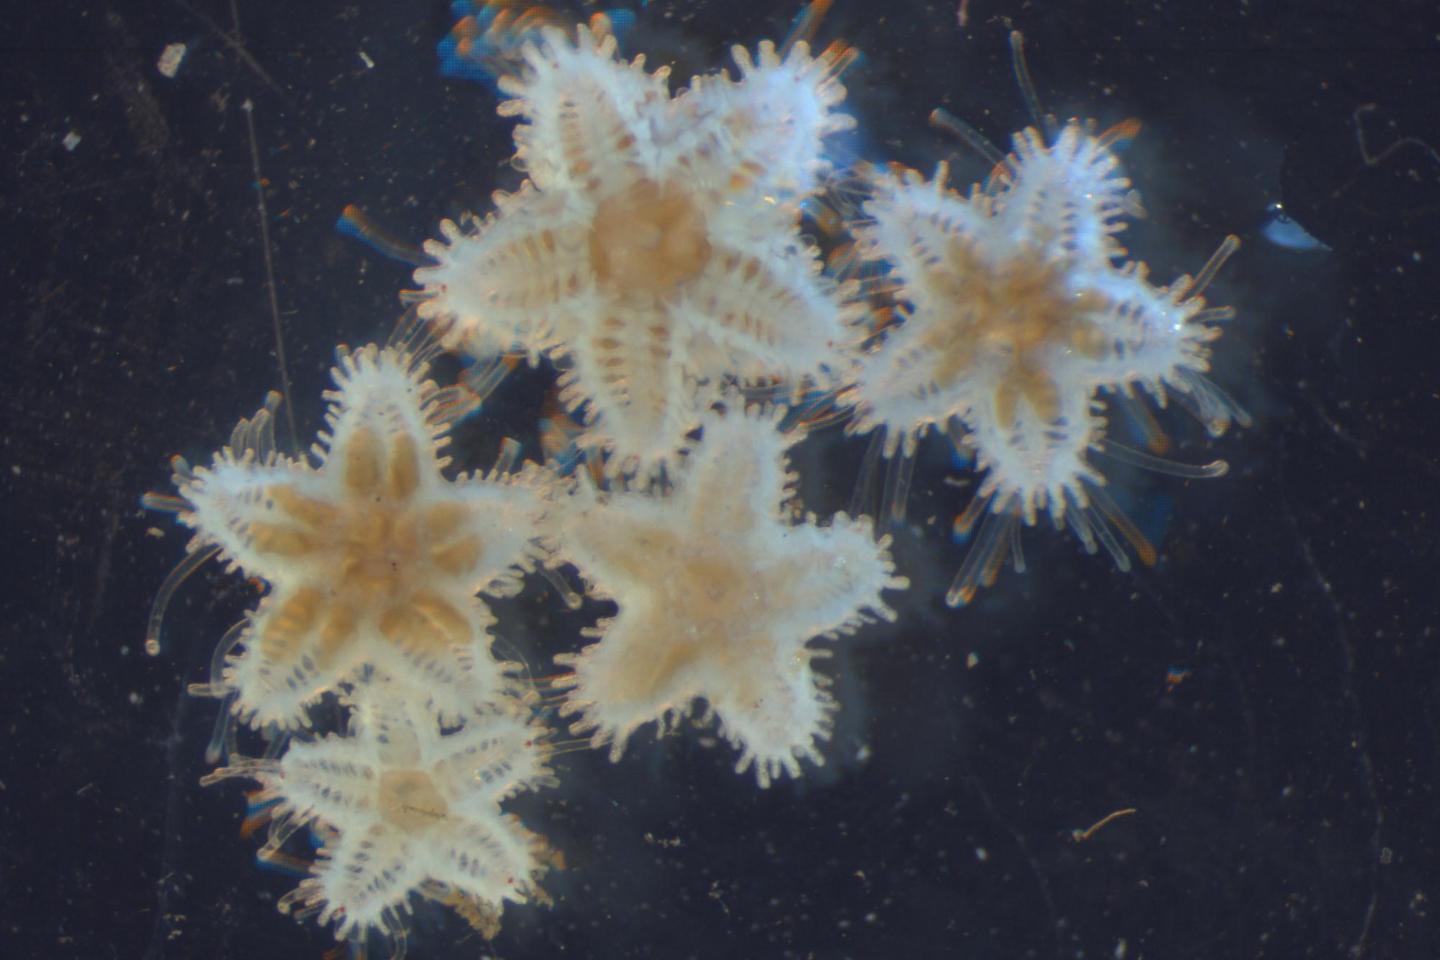 Young Sea Stars at the GEOMAR Laboratory